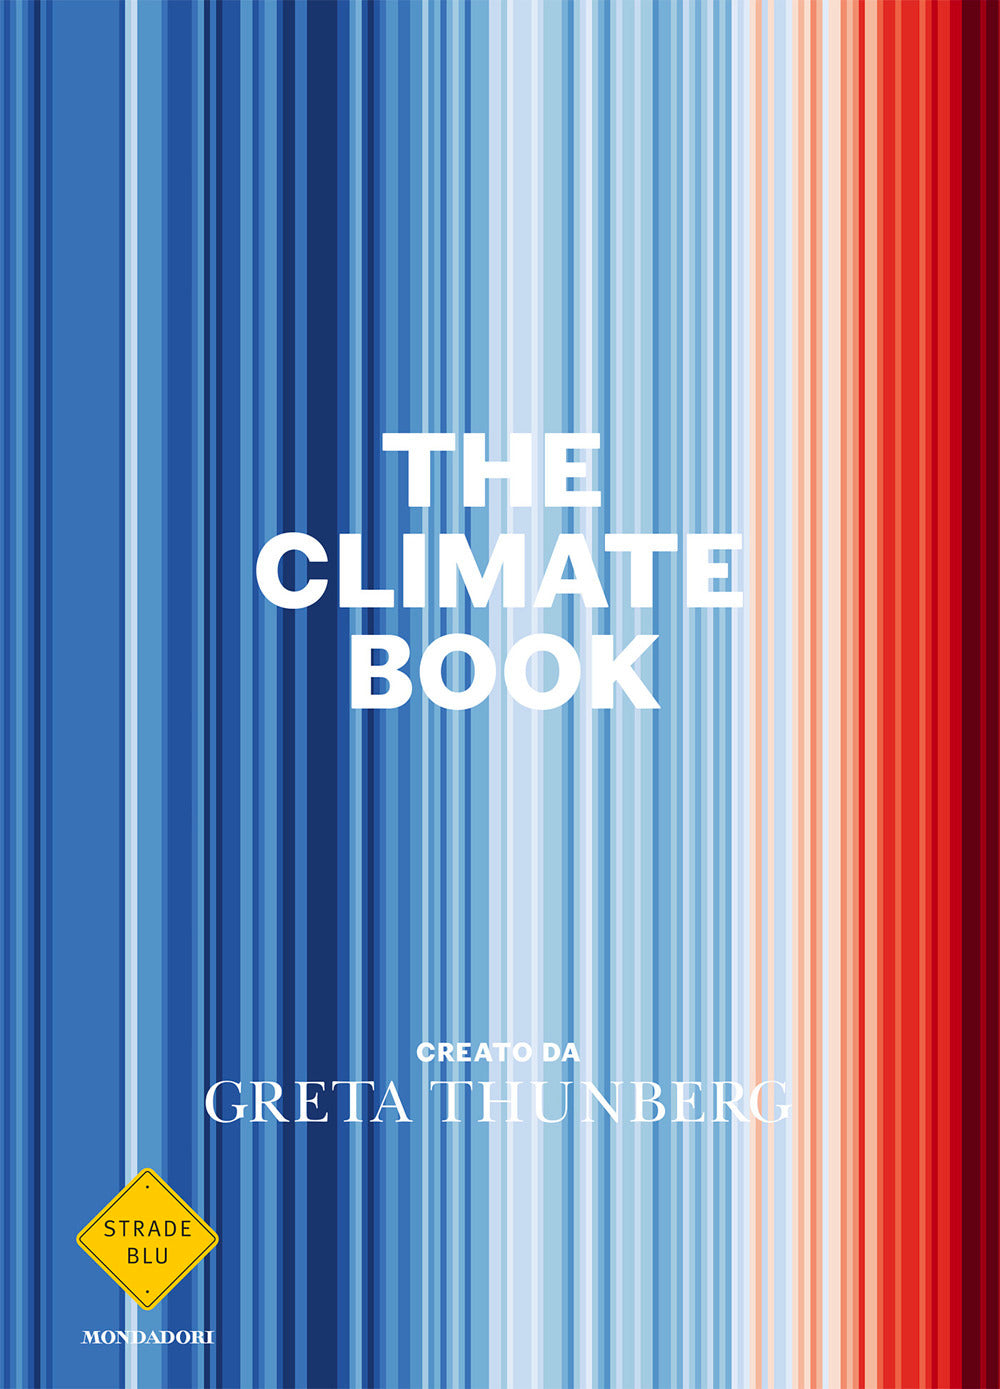 The climate book.